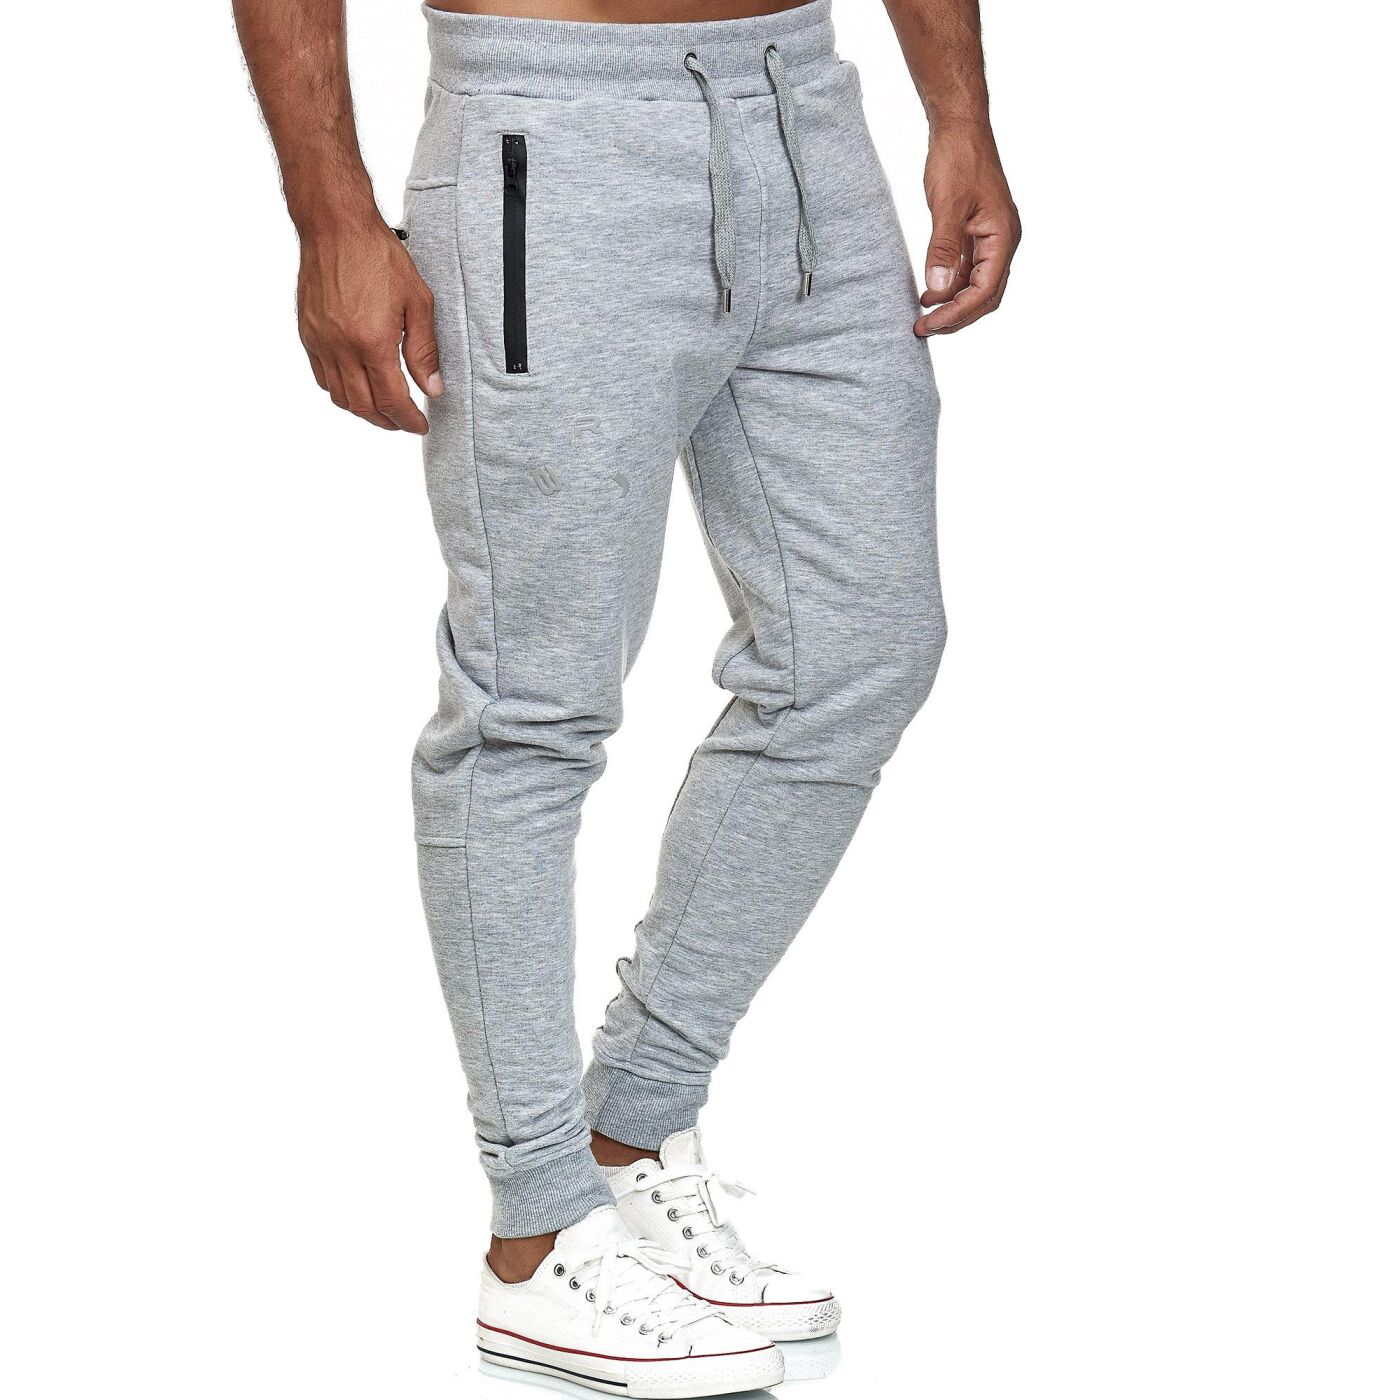 Romano nx Men's 100% Cotton Joggers Trackpants with Two Side